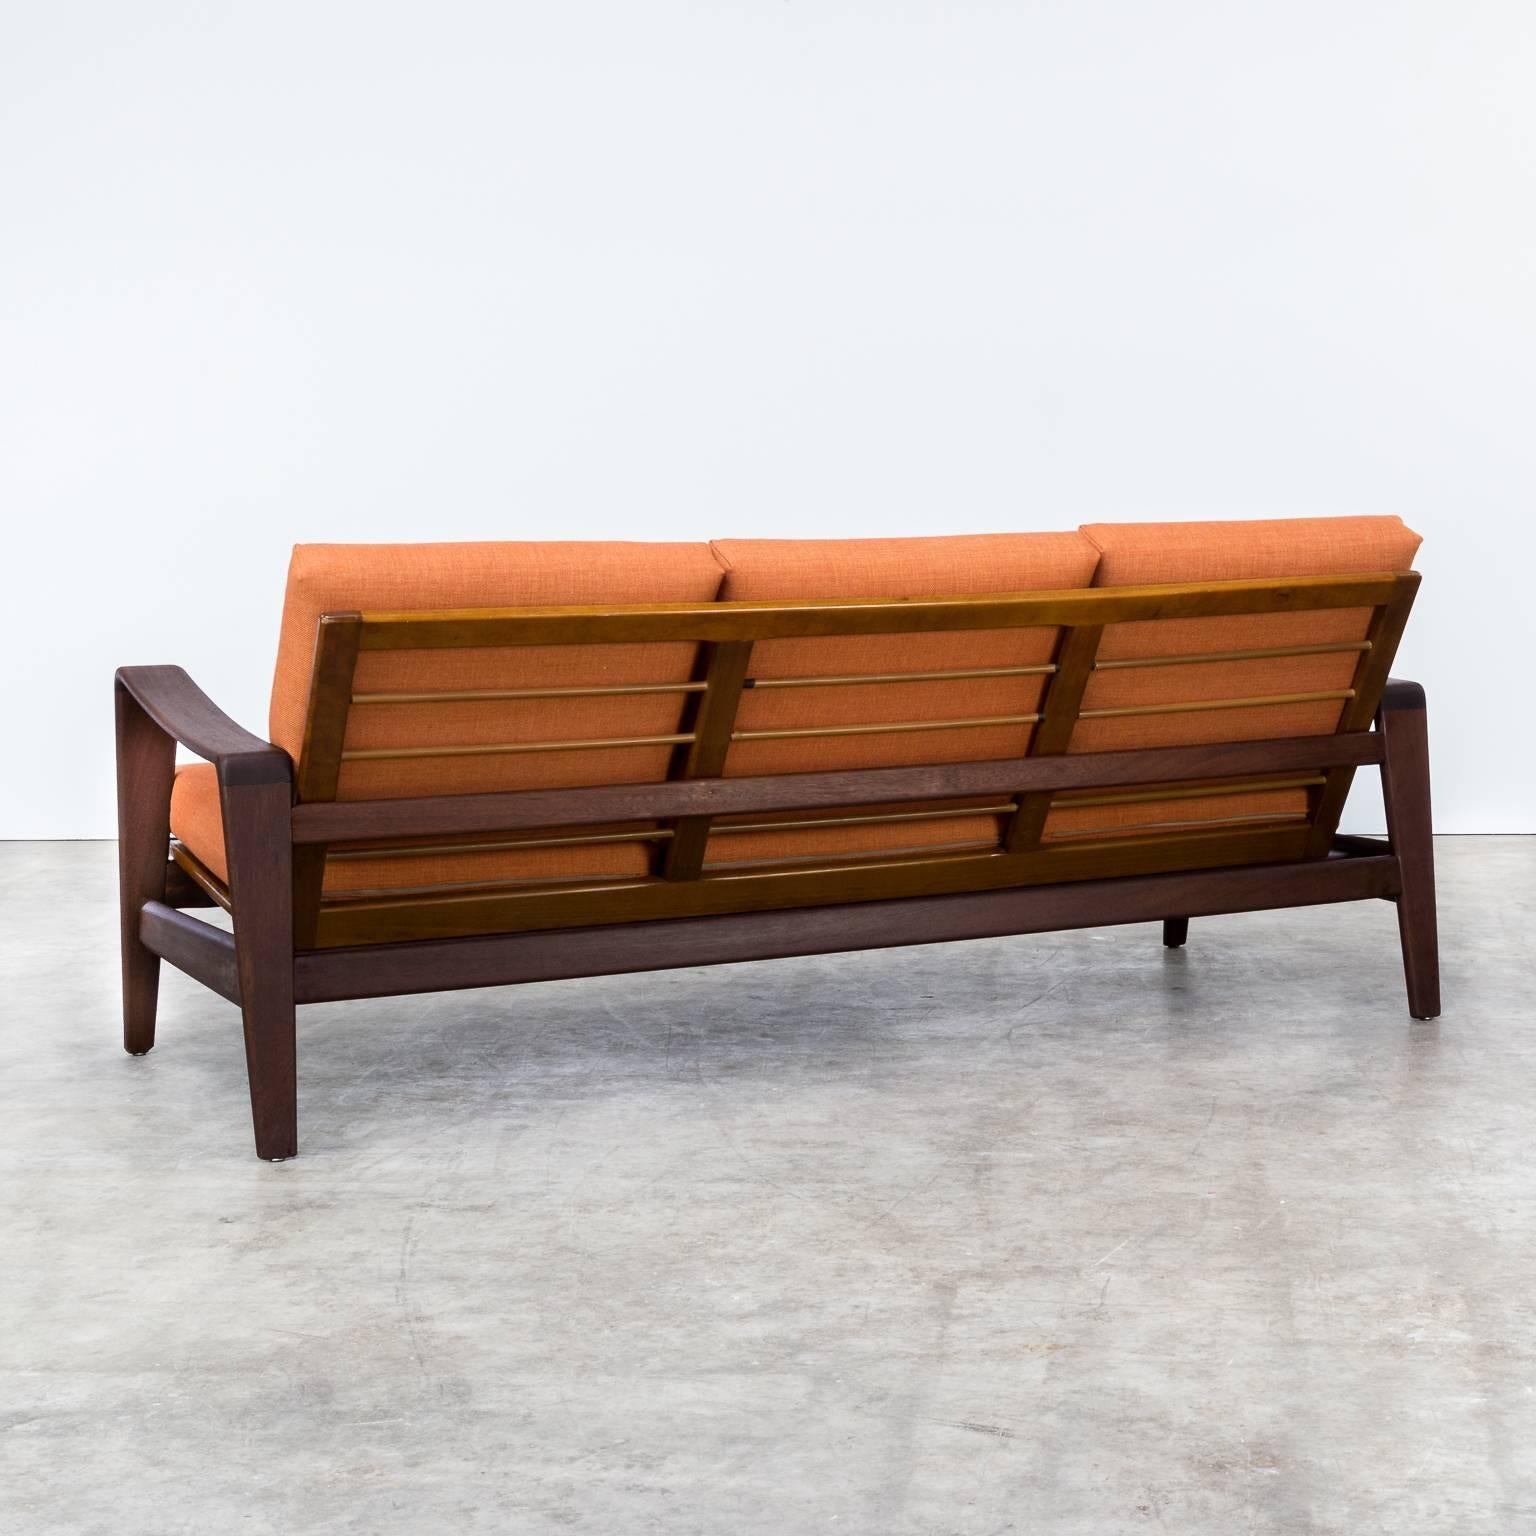 Mid-20th Century 1960s Arne Wahl Iversen Seating Group for Komfort For Sale